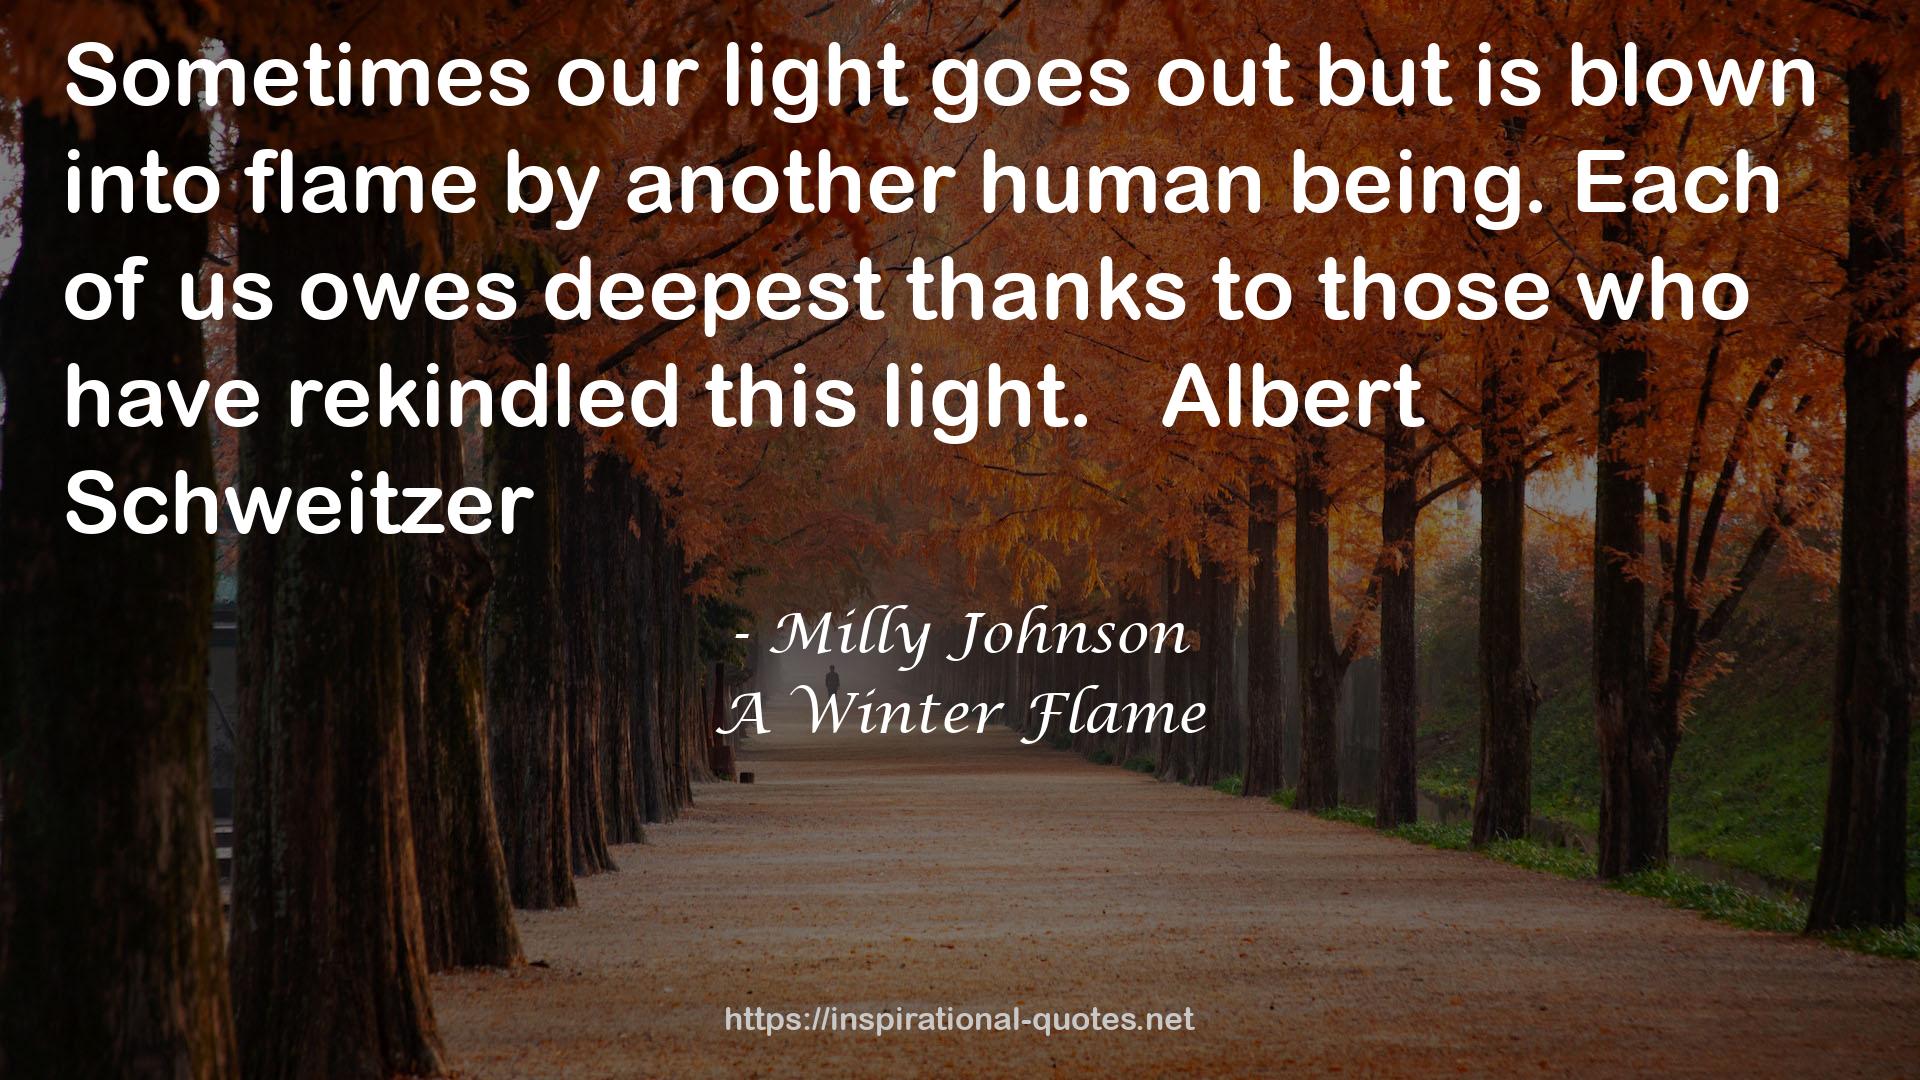 A Winter Flame QUOTES